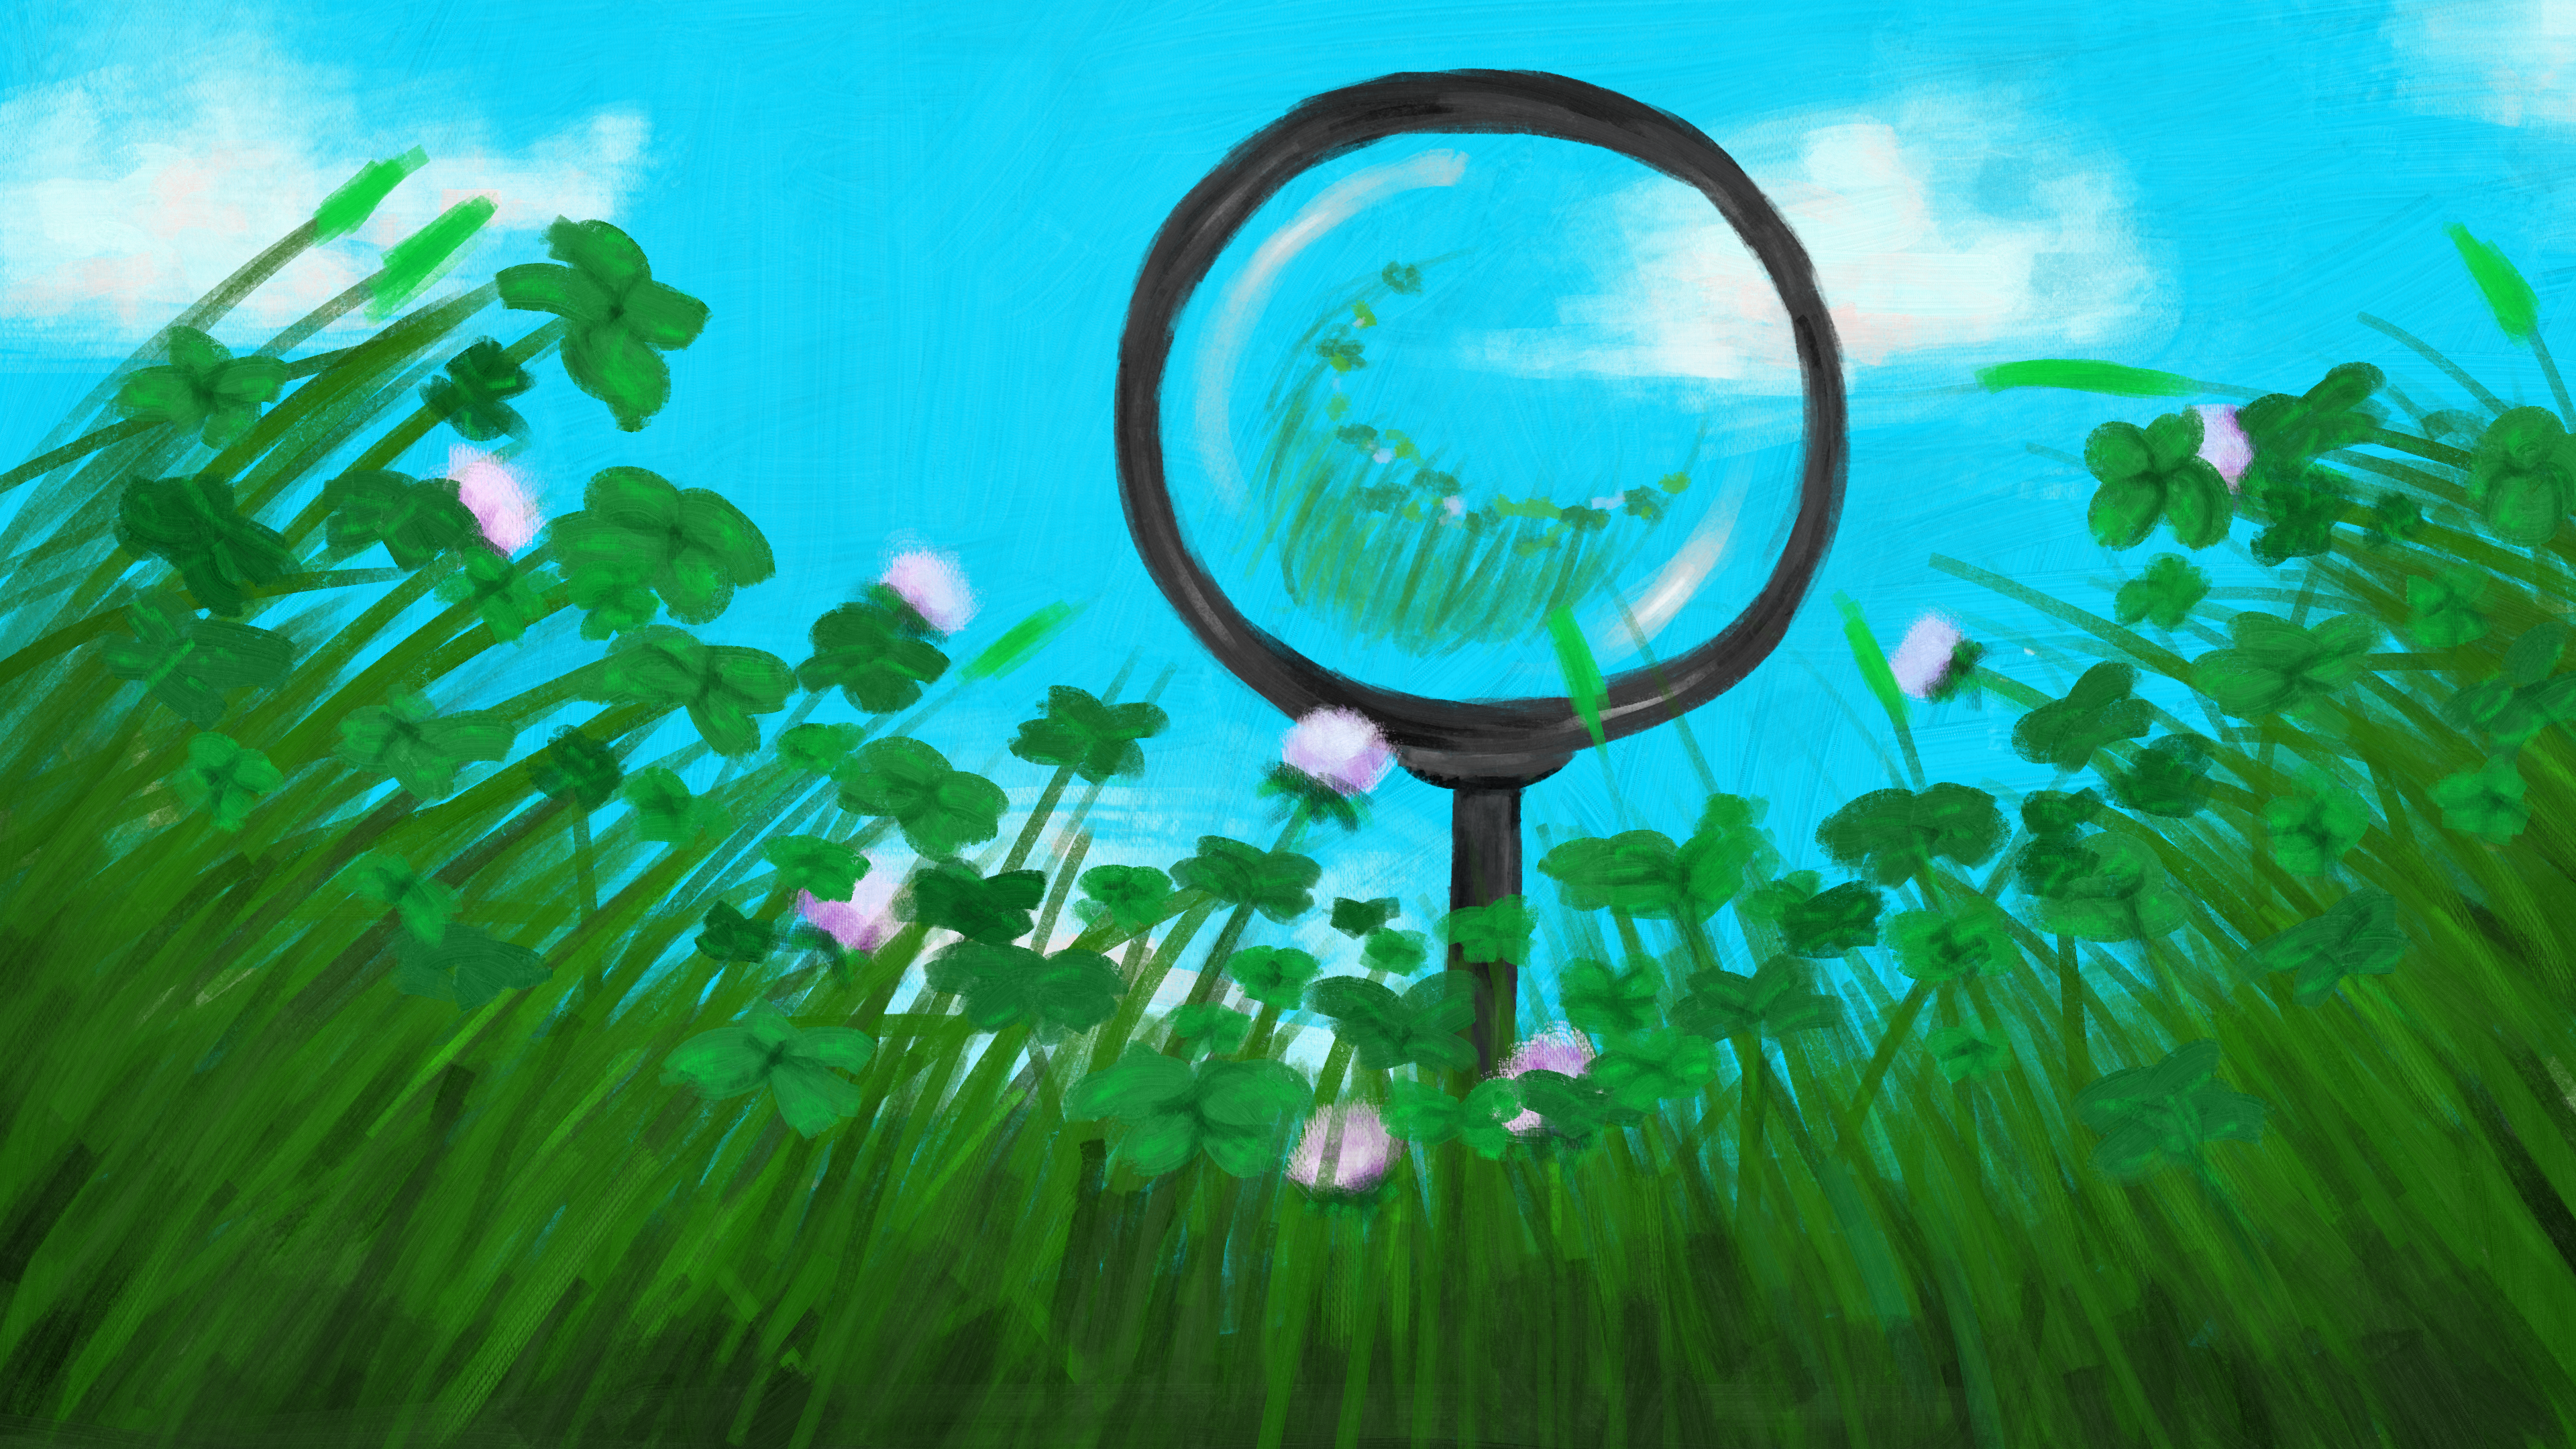 General 3840x2160 nature magnifying glass grass digital art painting